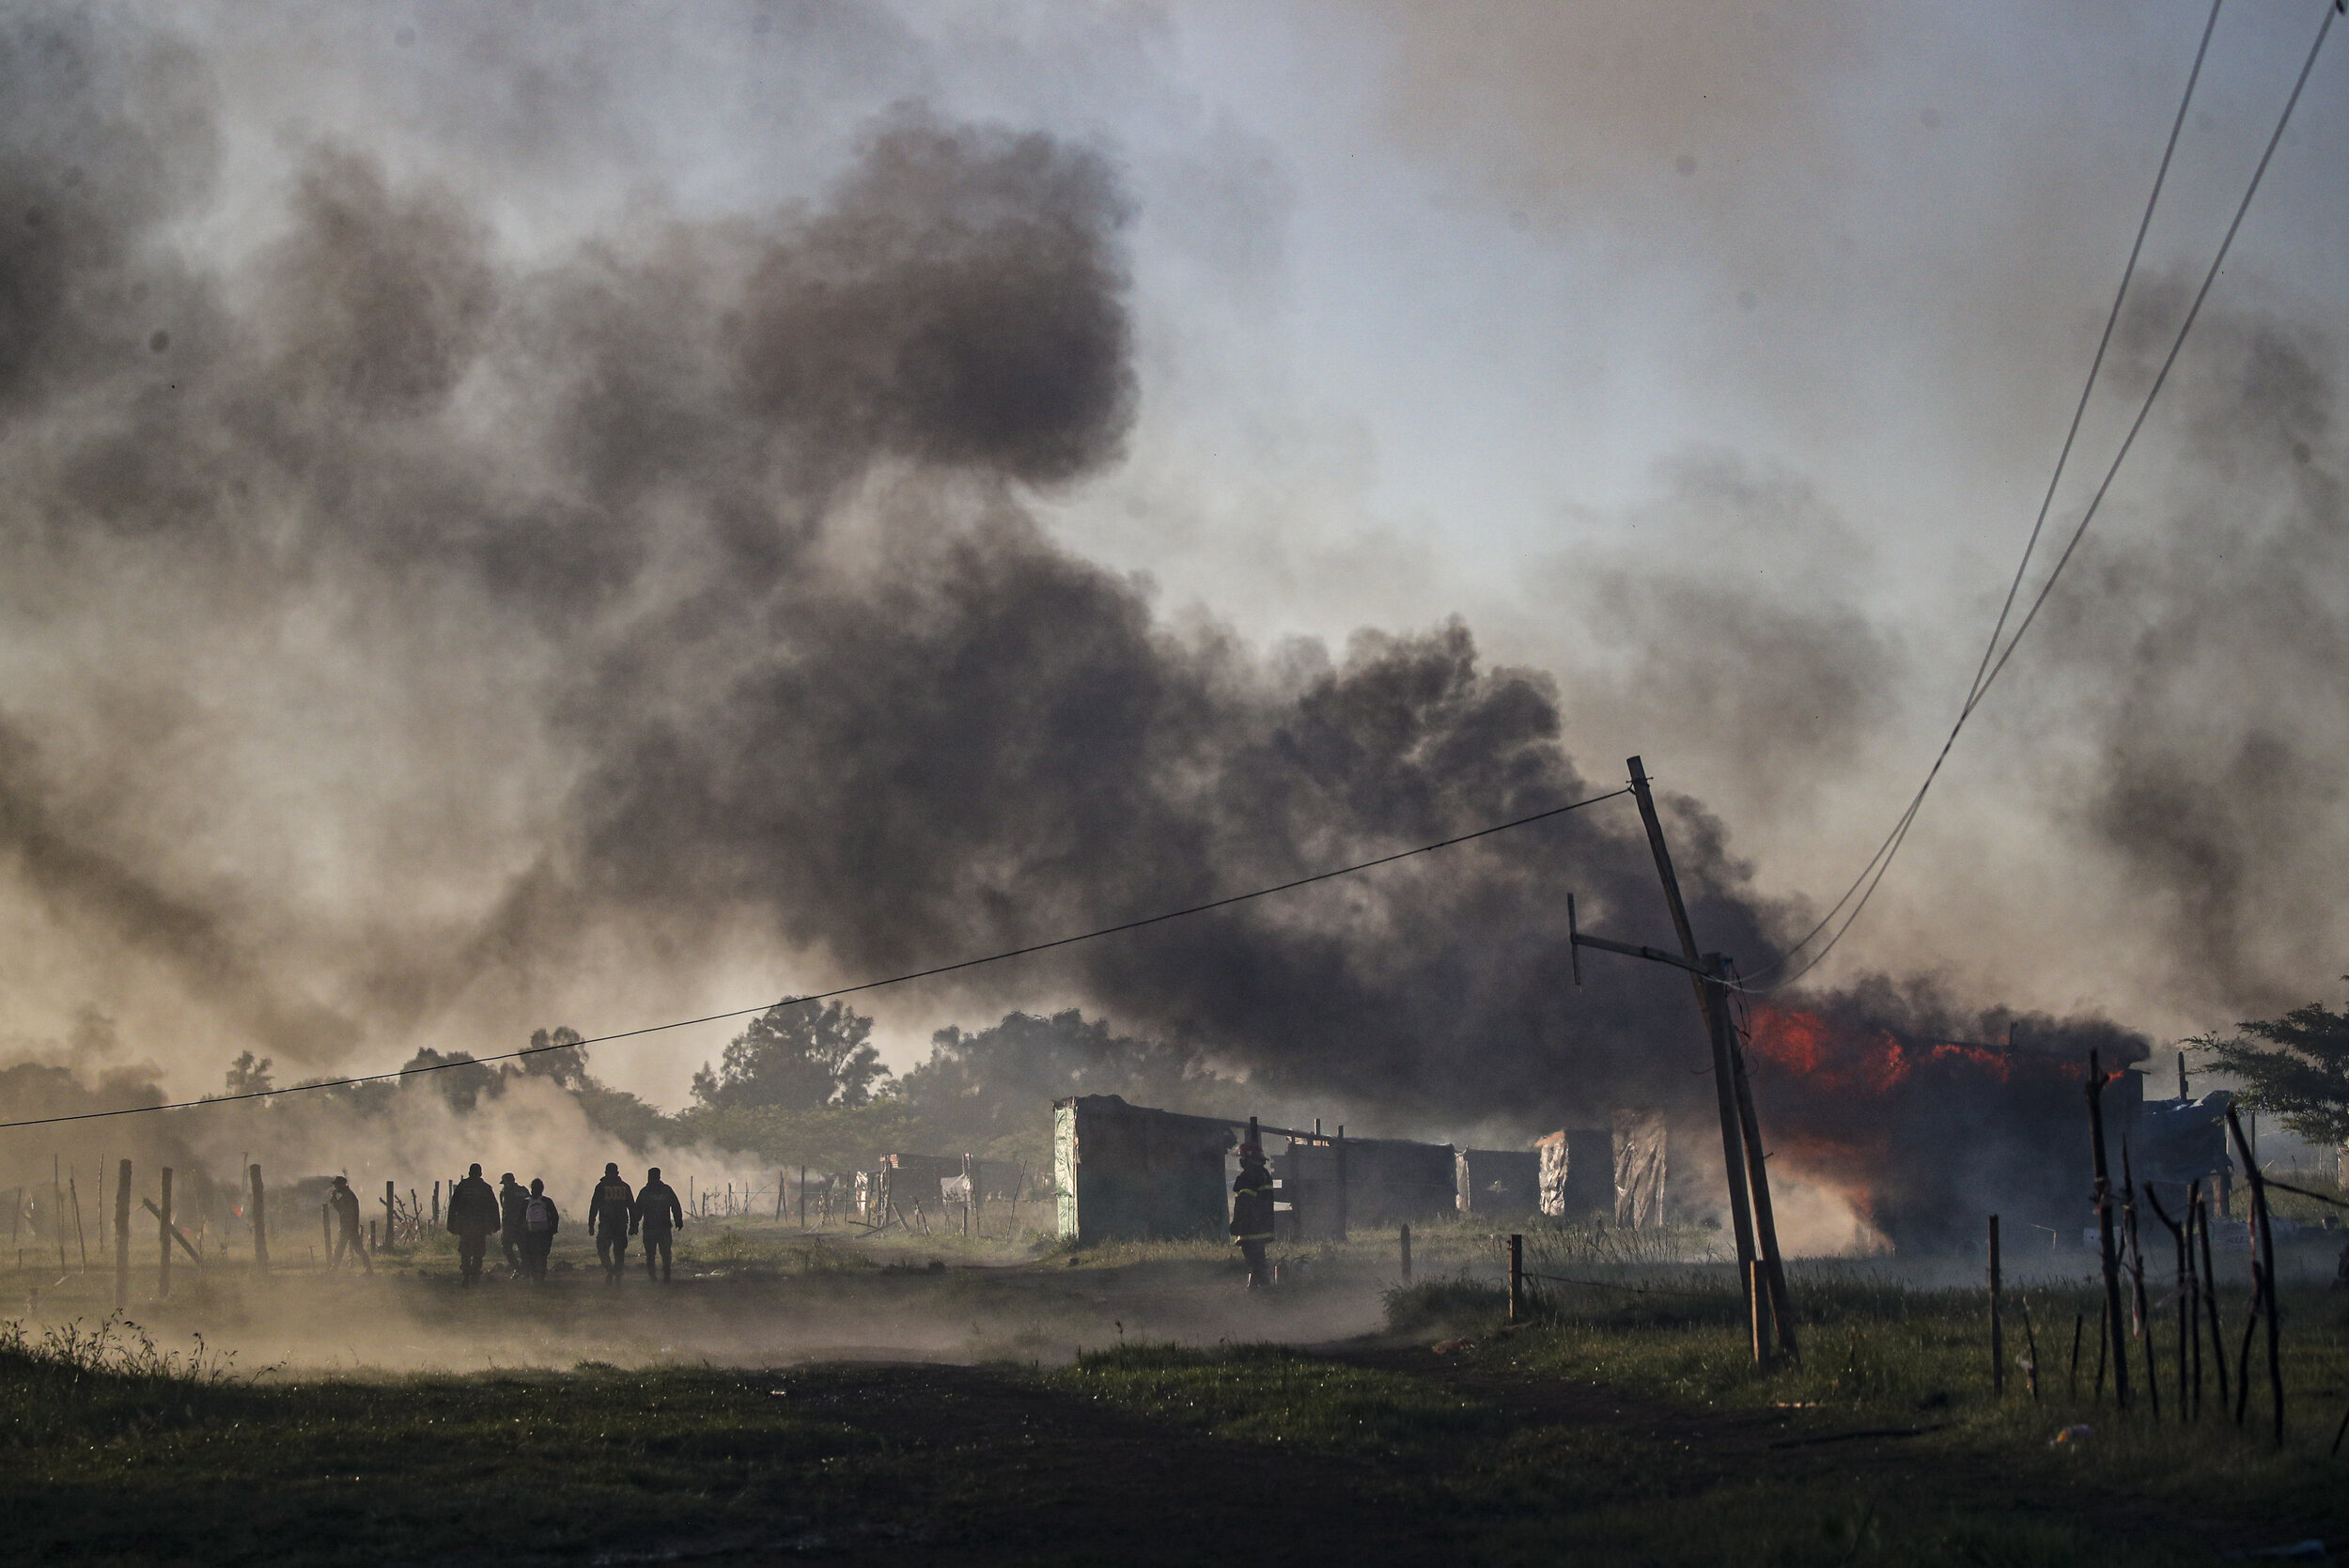  Police evict squatters in Guernica, Buenos Aires province, Argentina, Thursday, Oct. 29, 2020. Hundreds of families had been living in shacks on the land for more than three months, in a reflection of the growing poverty and lack of housing. (AP Pho